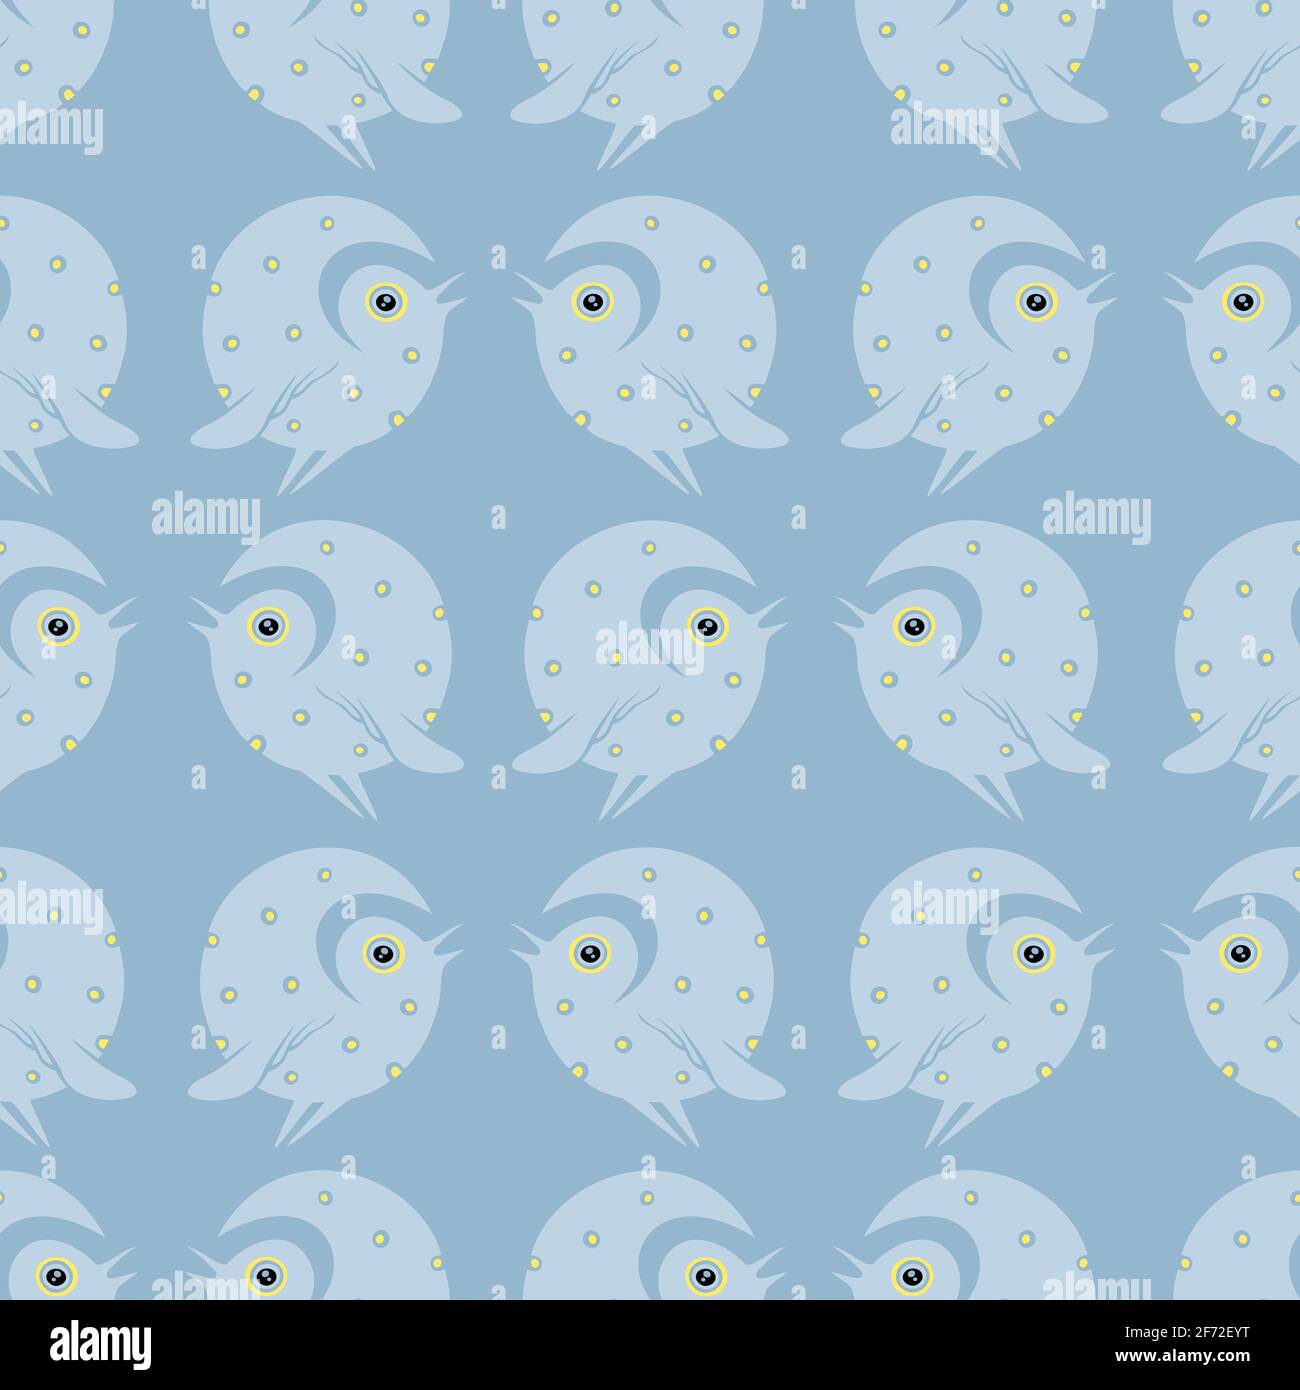 Spotted bluebird on a seamless pattern Stock Vector